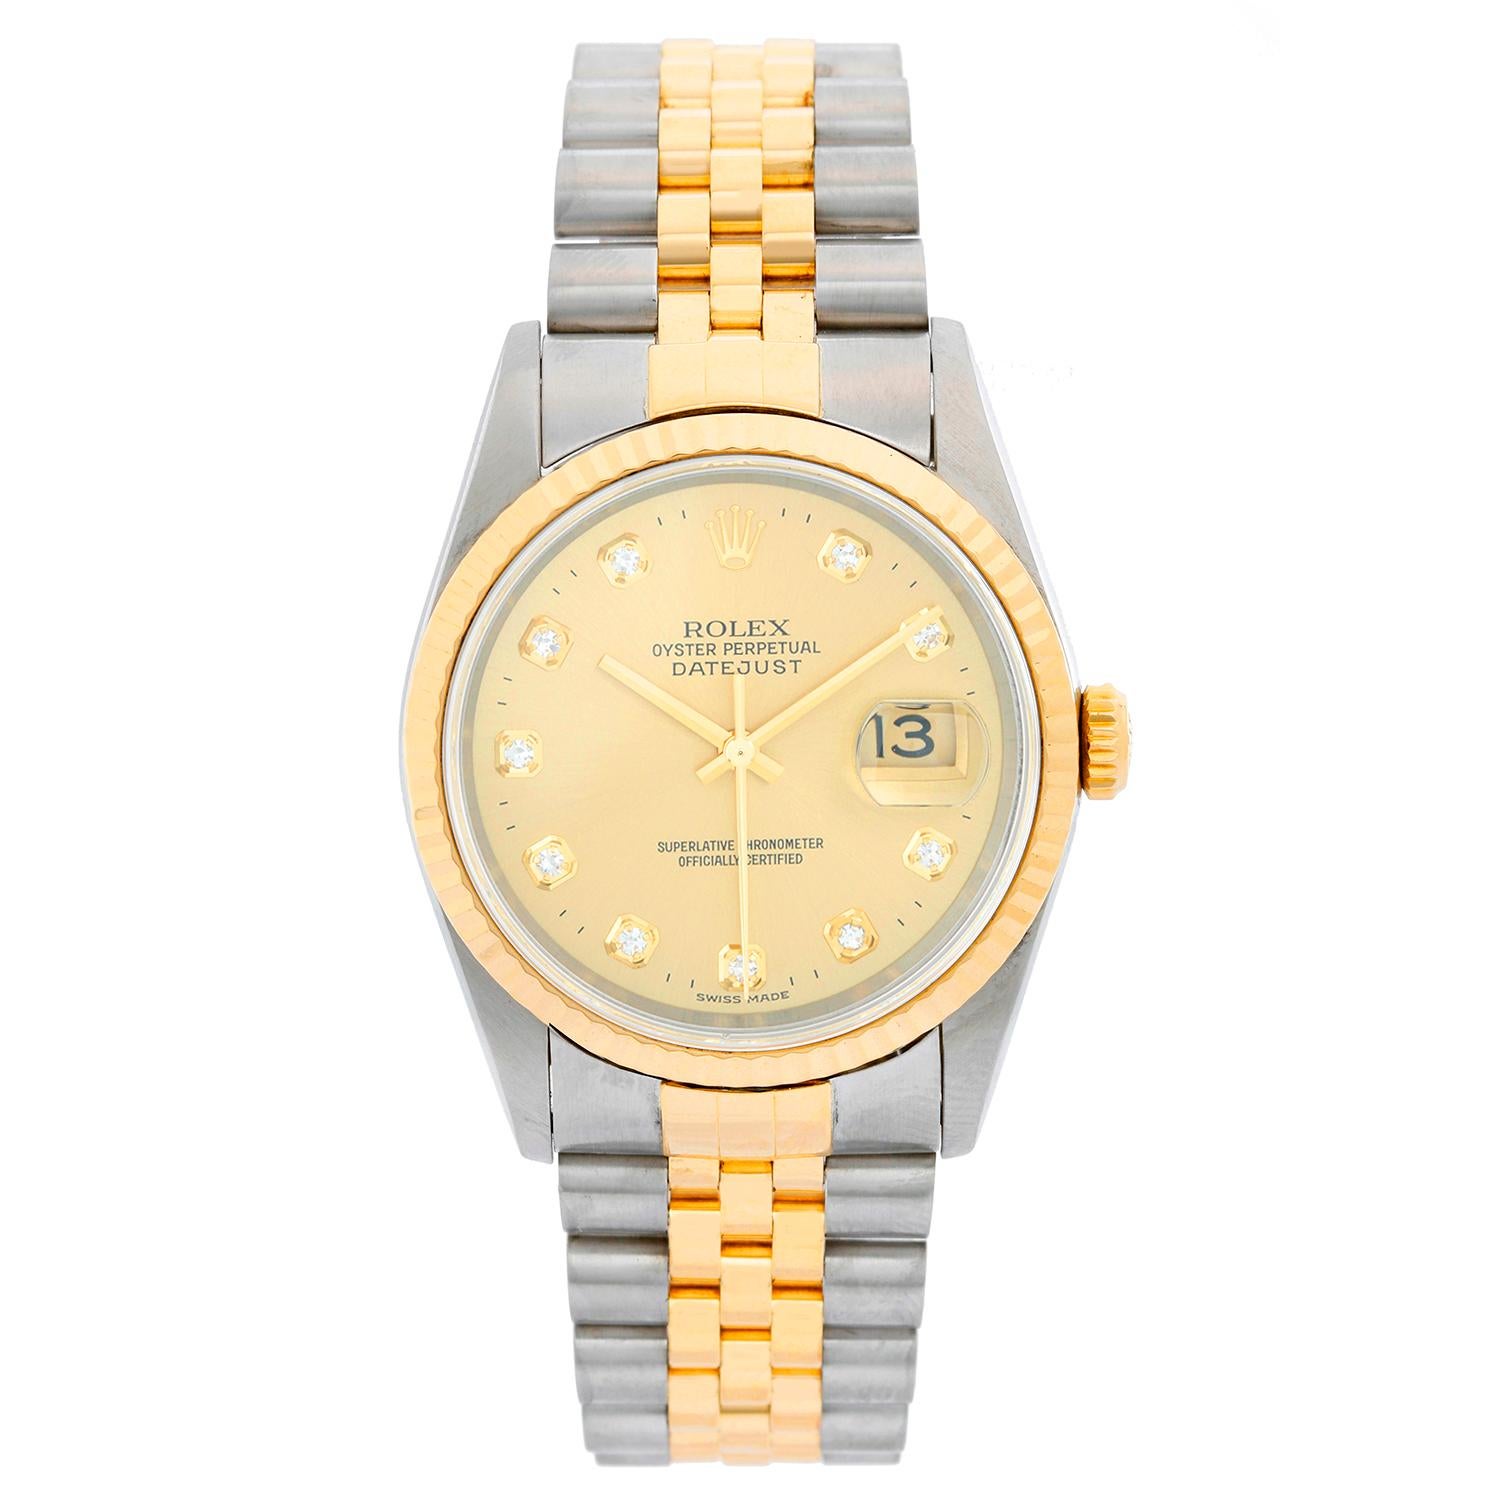 Rolex Datejust 2-Tone Men's Steel and Gold Watch 16233 1